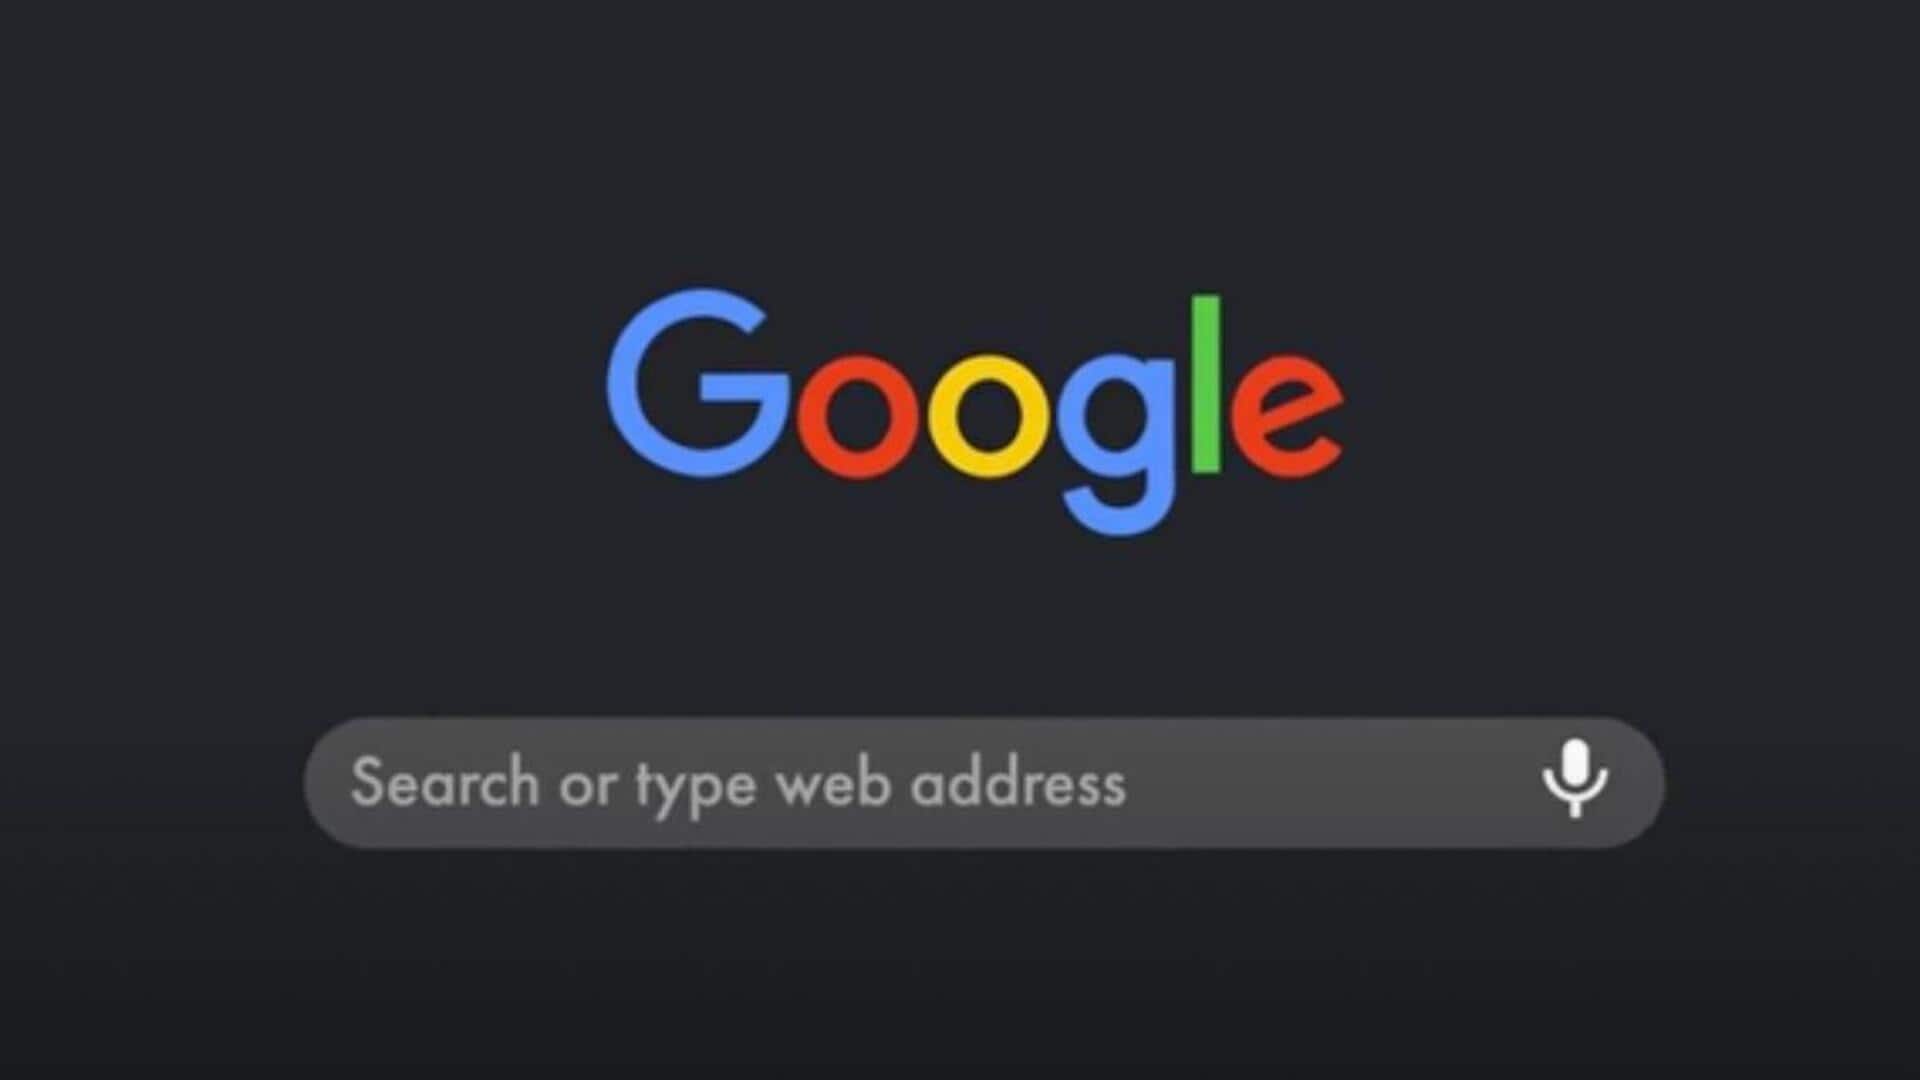 Want to turn off Google's dark mode? Follow these steps